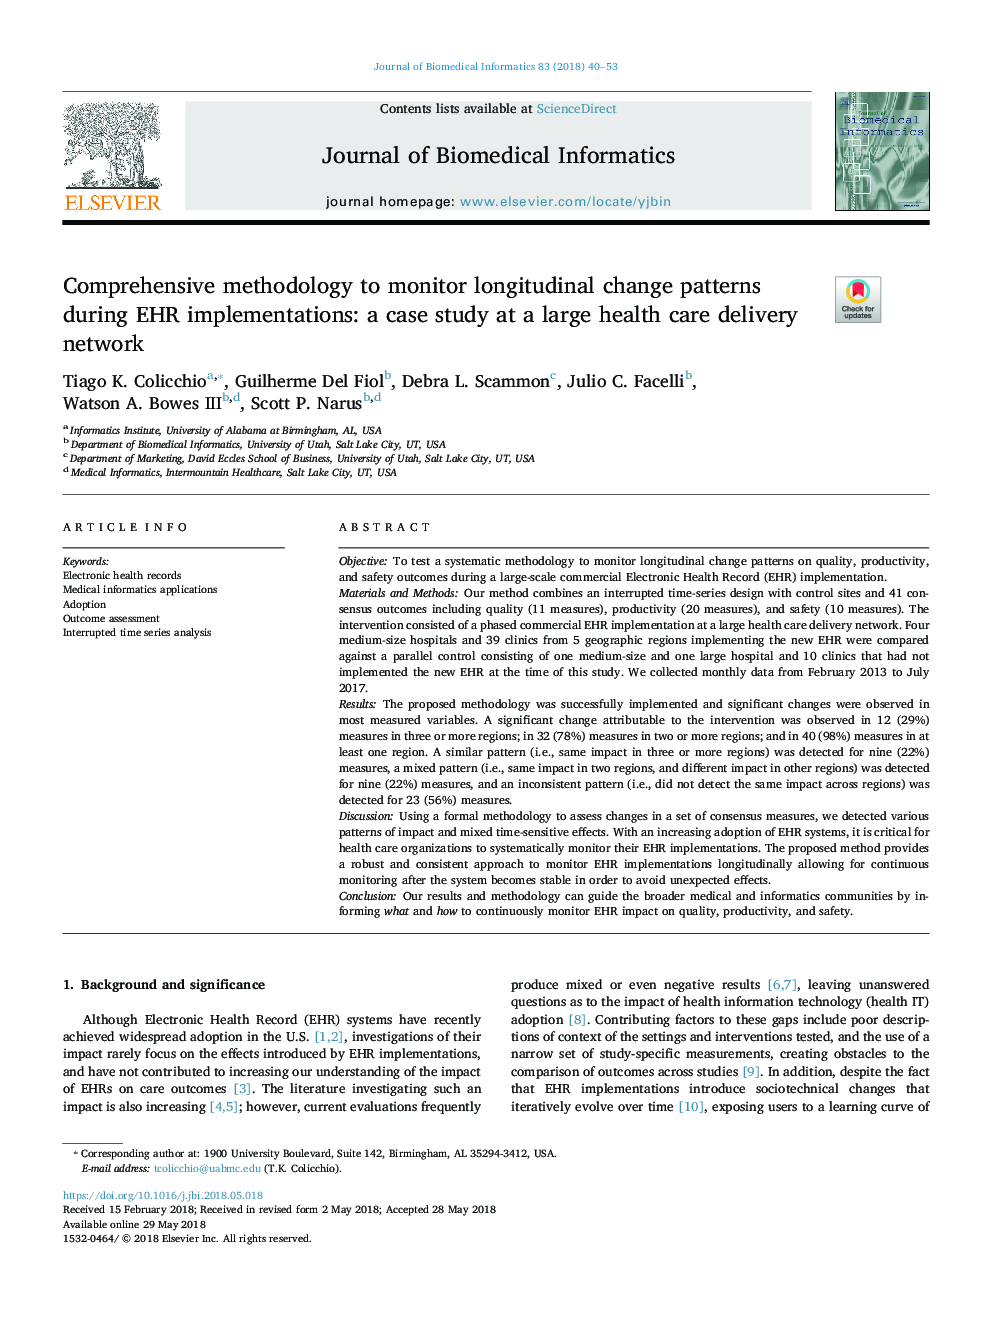 Comprehensive methodology to monitor longitudinal change patterns during EHR implementations: a case study at a large health care delivery network